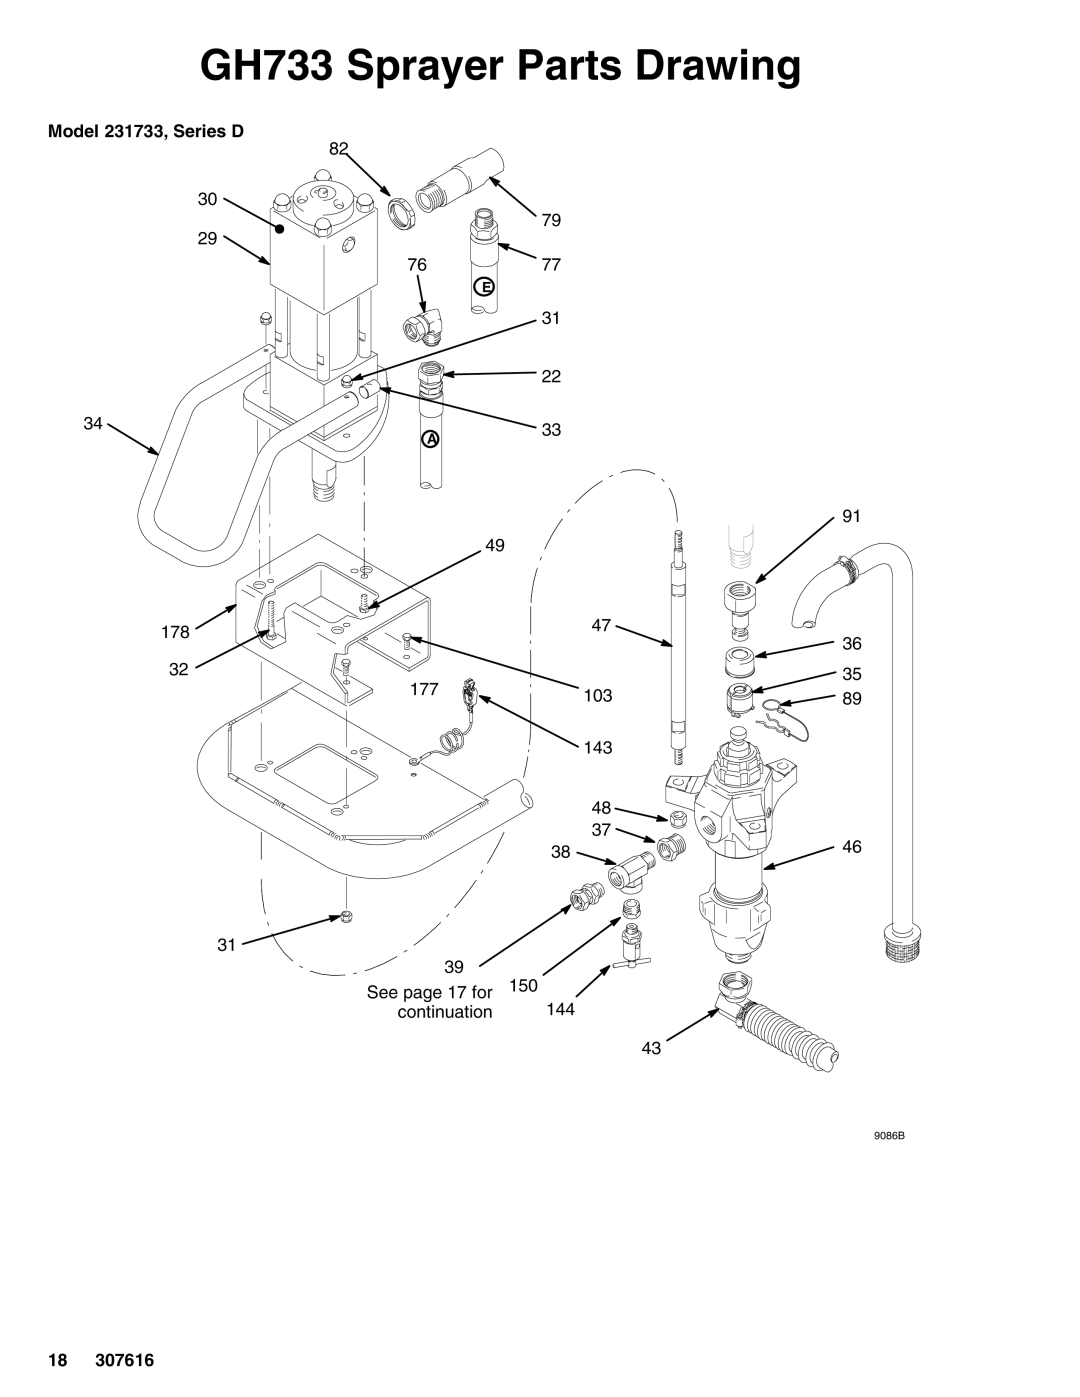 Graco Inc 230975, GH 733 important safety instructions GH733 Sprayer Parts Drawing, Model 231733, Series D 